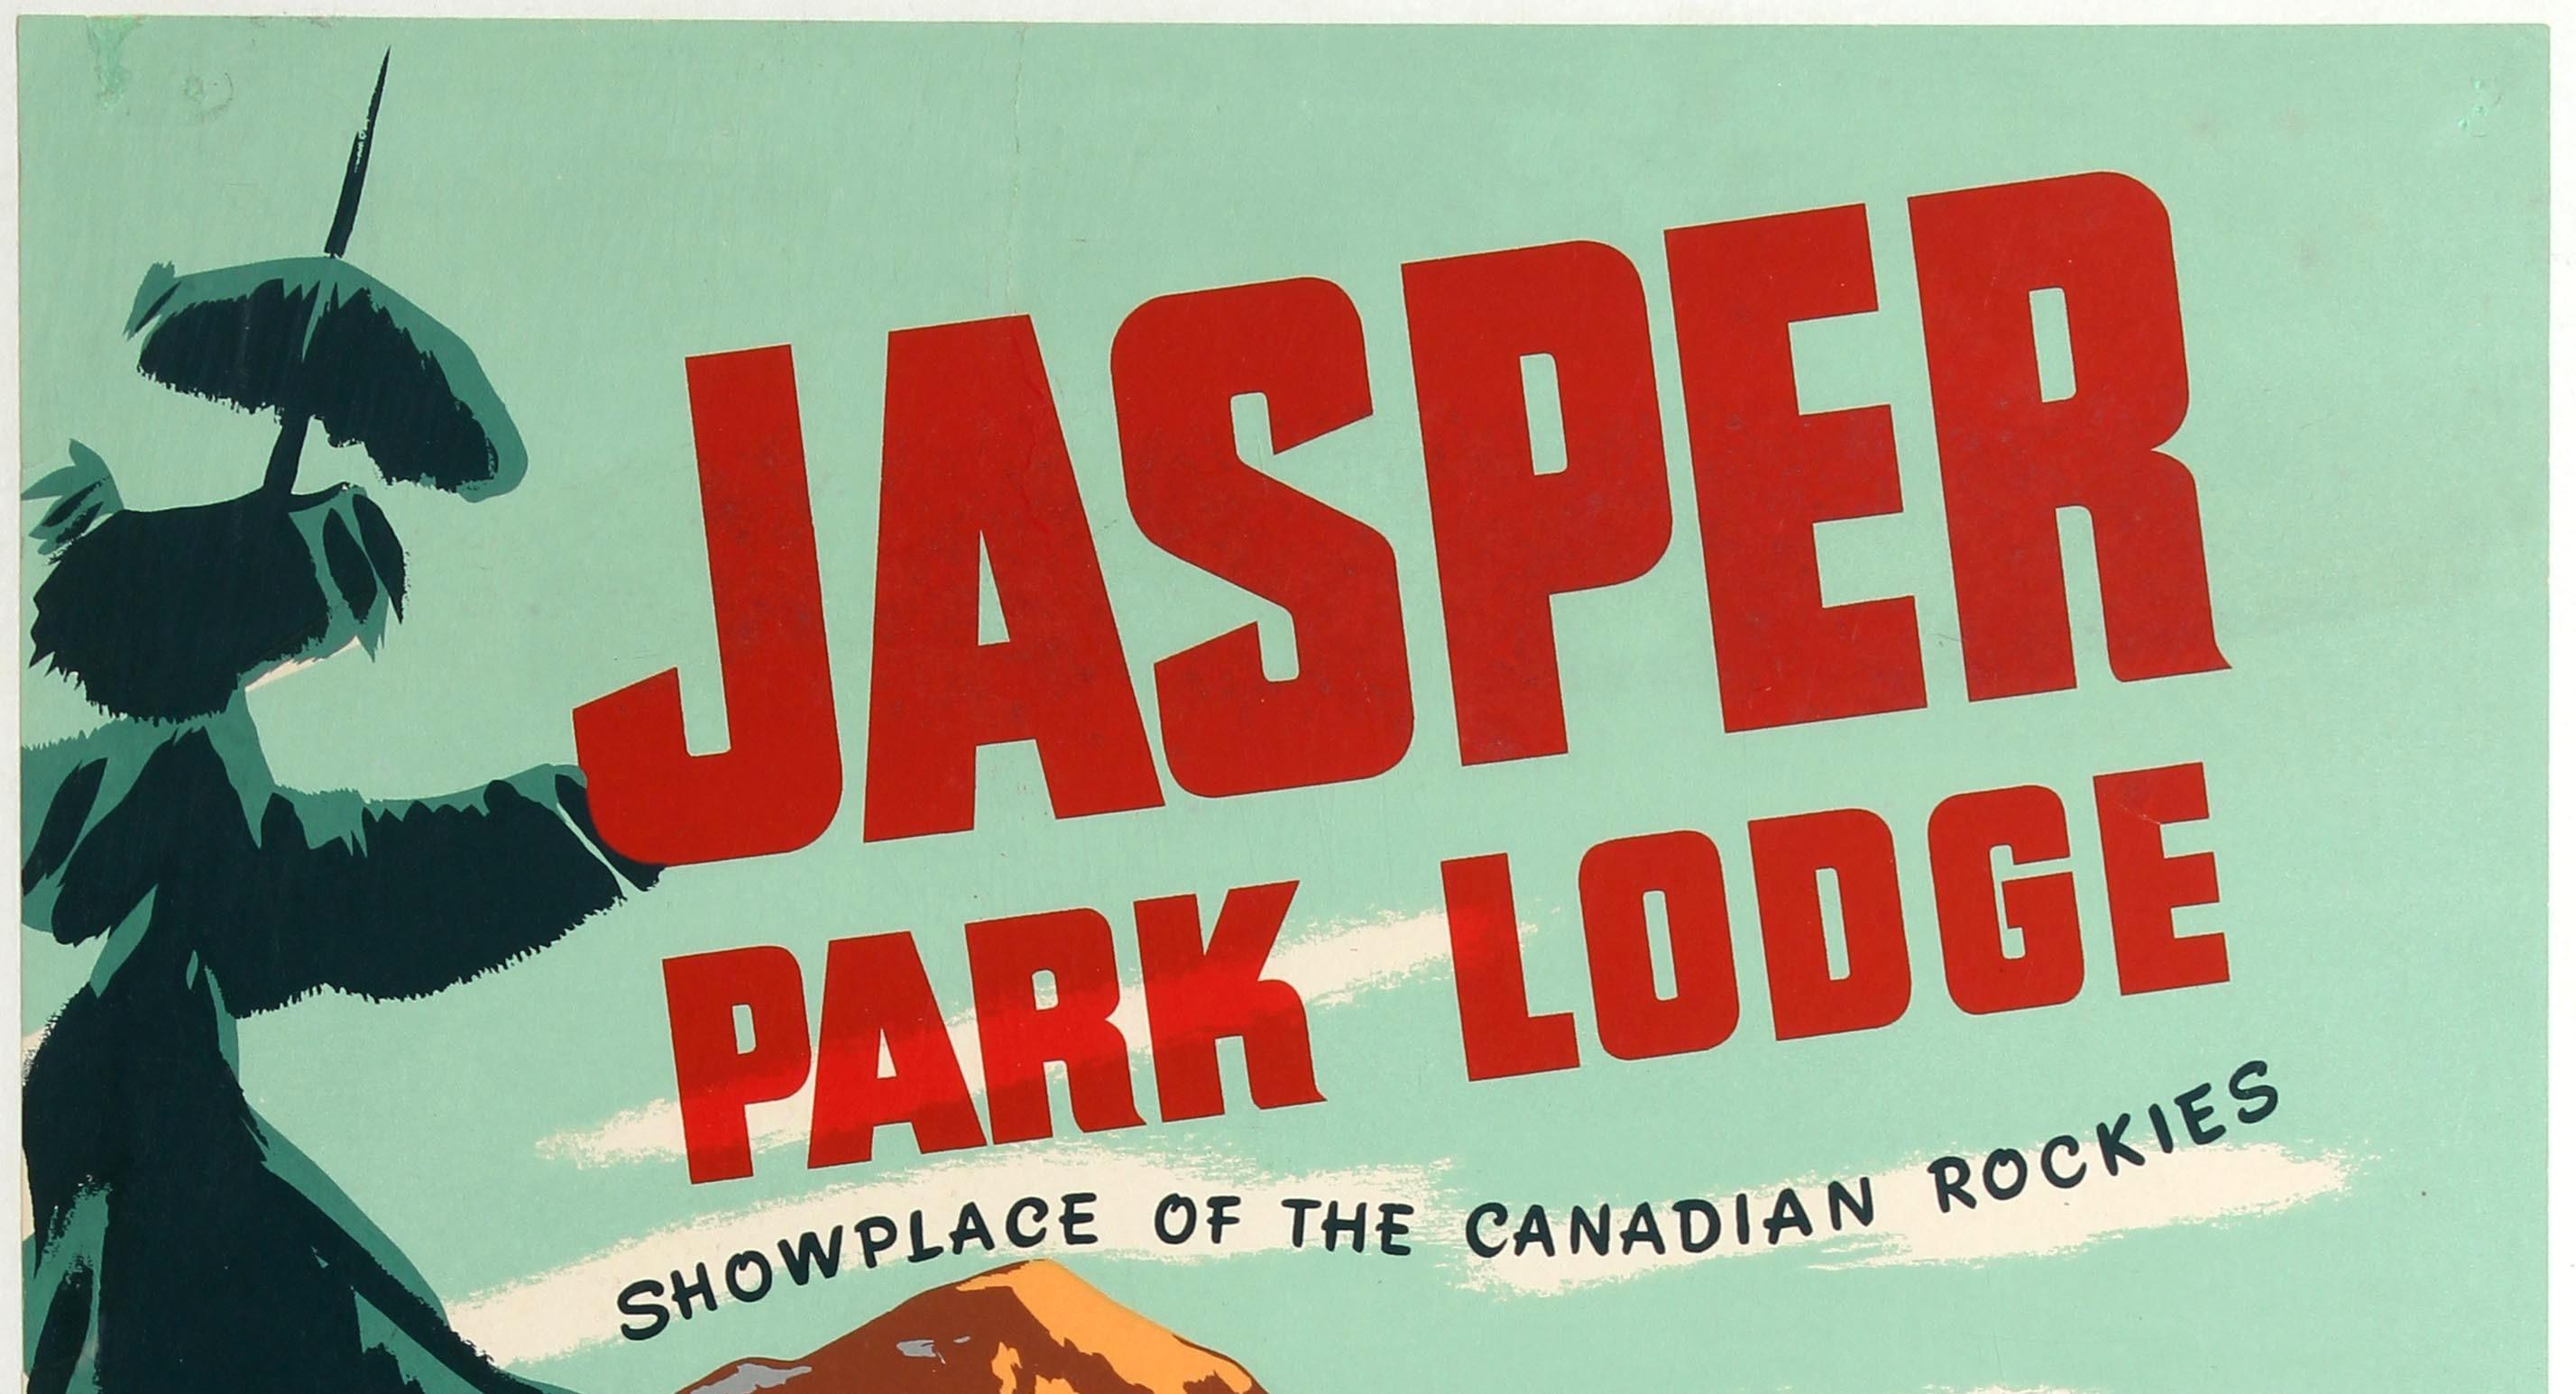 Original vintage travel poster for Jasper Park Lodge showplace of the Canadian Rockies, Canadian National The Railway to Everywhere in Canada, featuring a colourful image of a lady wearing a yellow checked jacket and riding trousers leading a horse